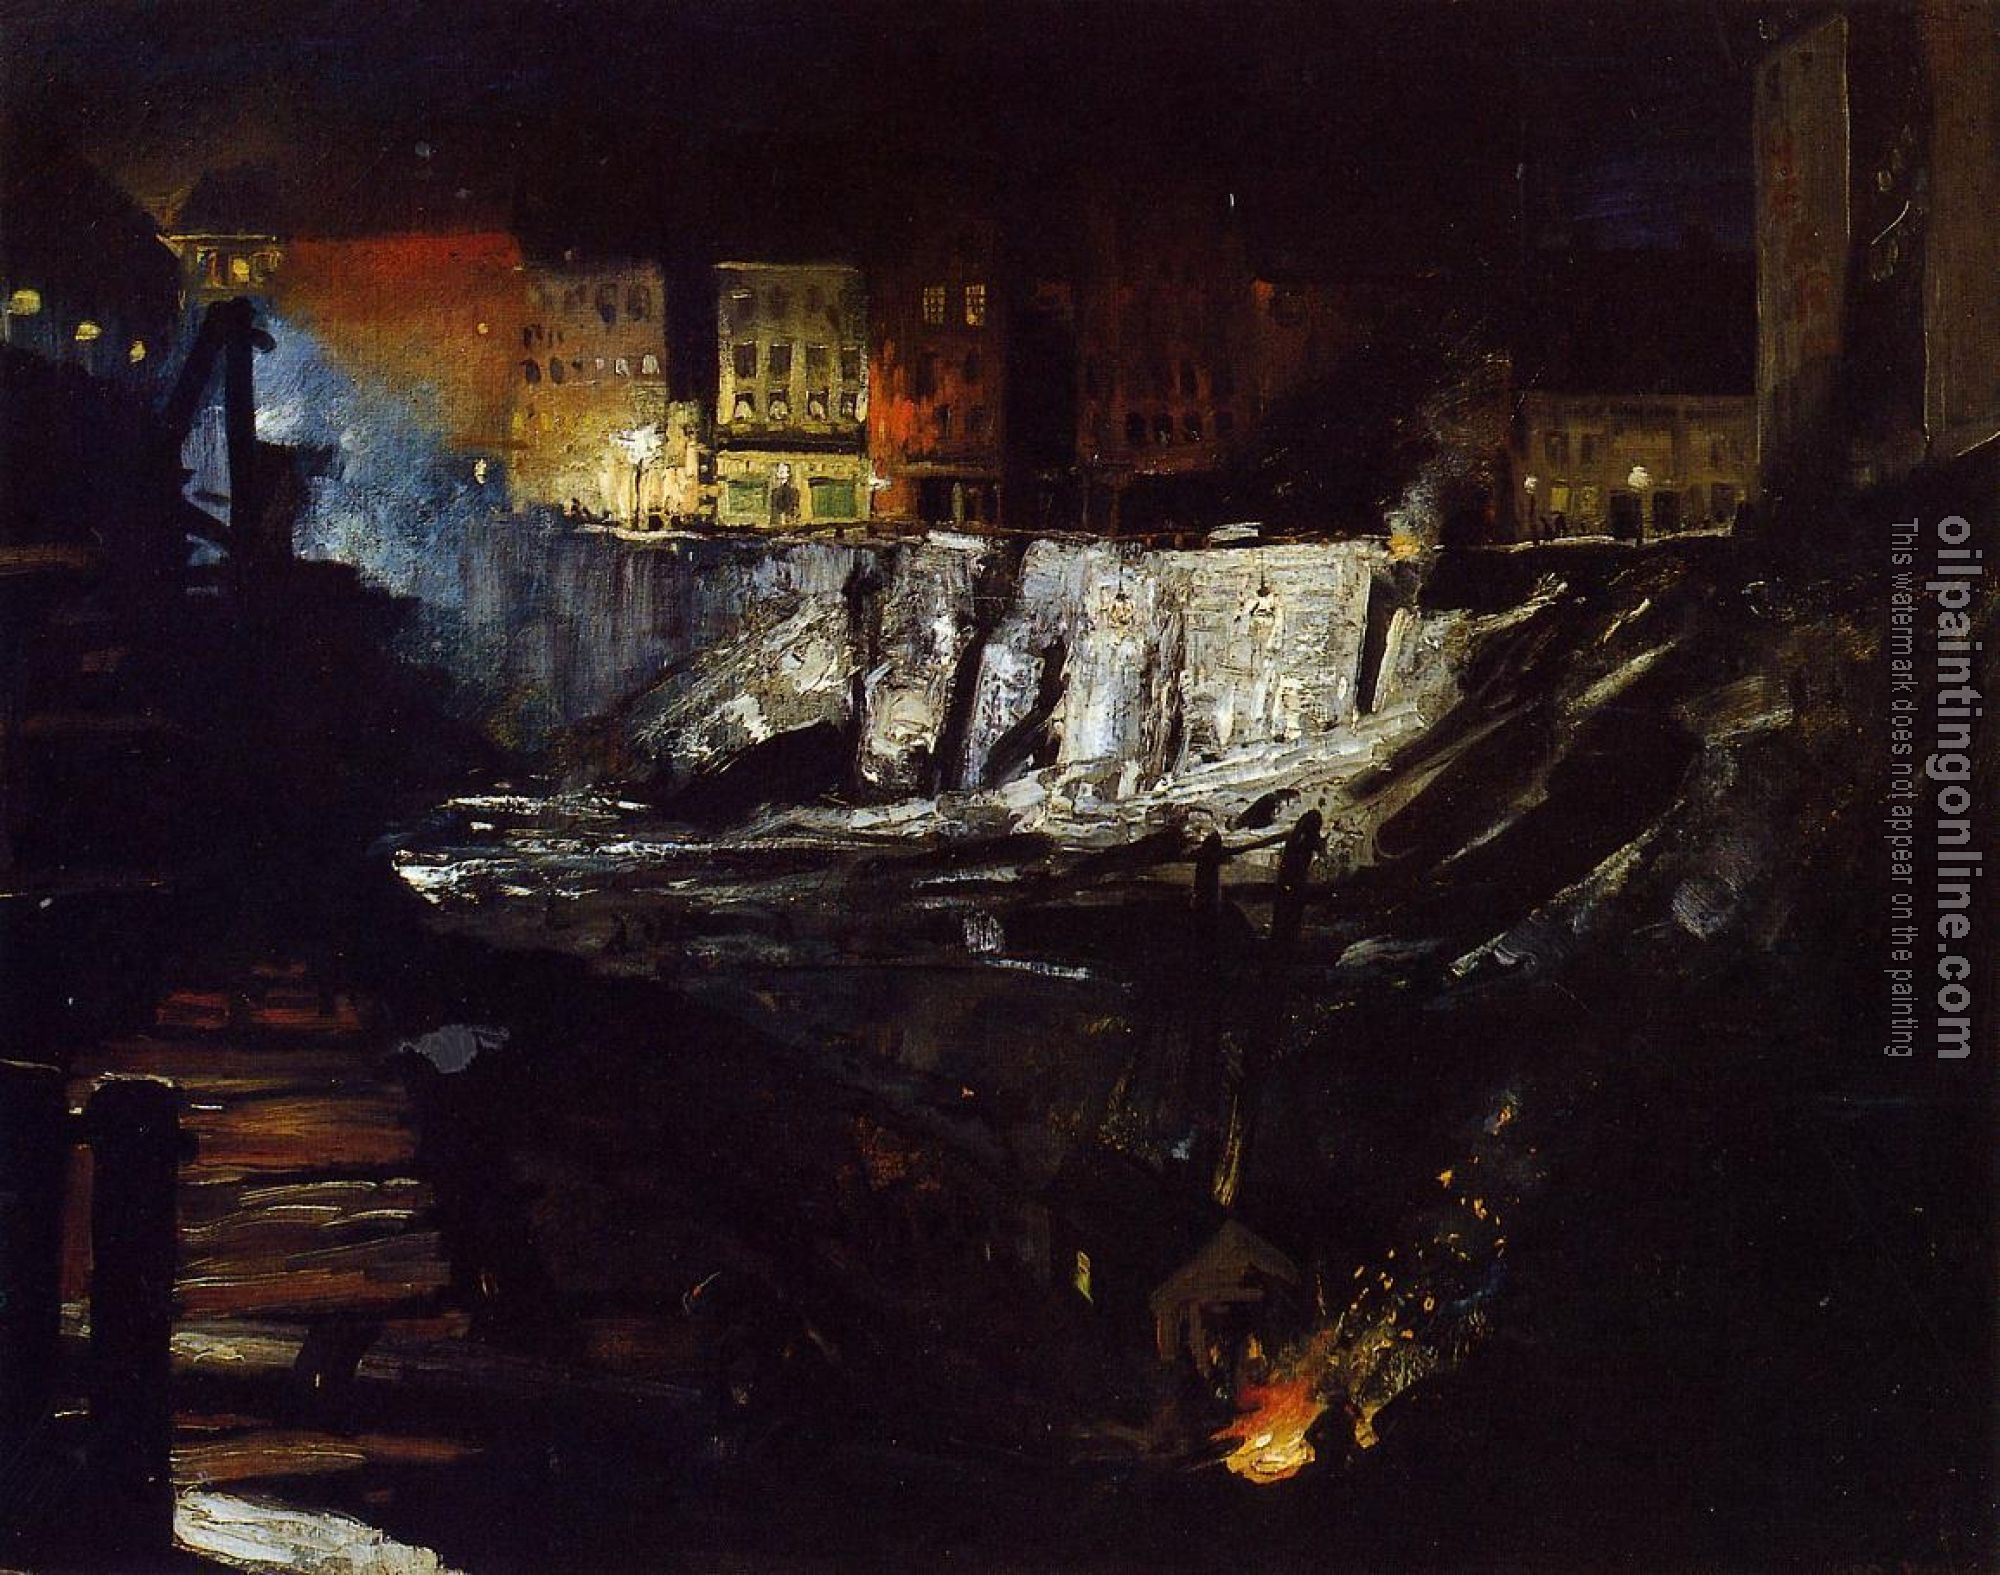 Bellows, George - Excavation at Night